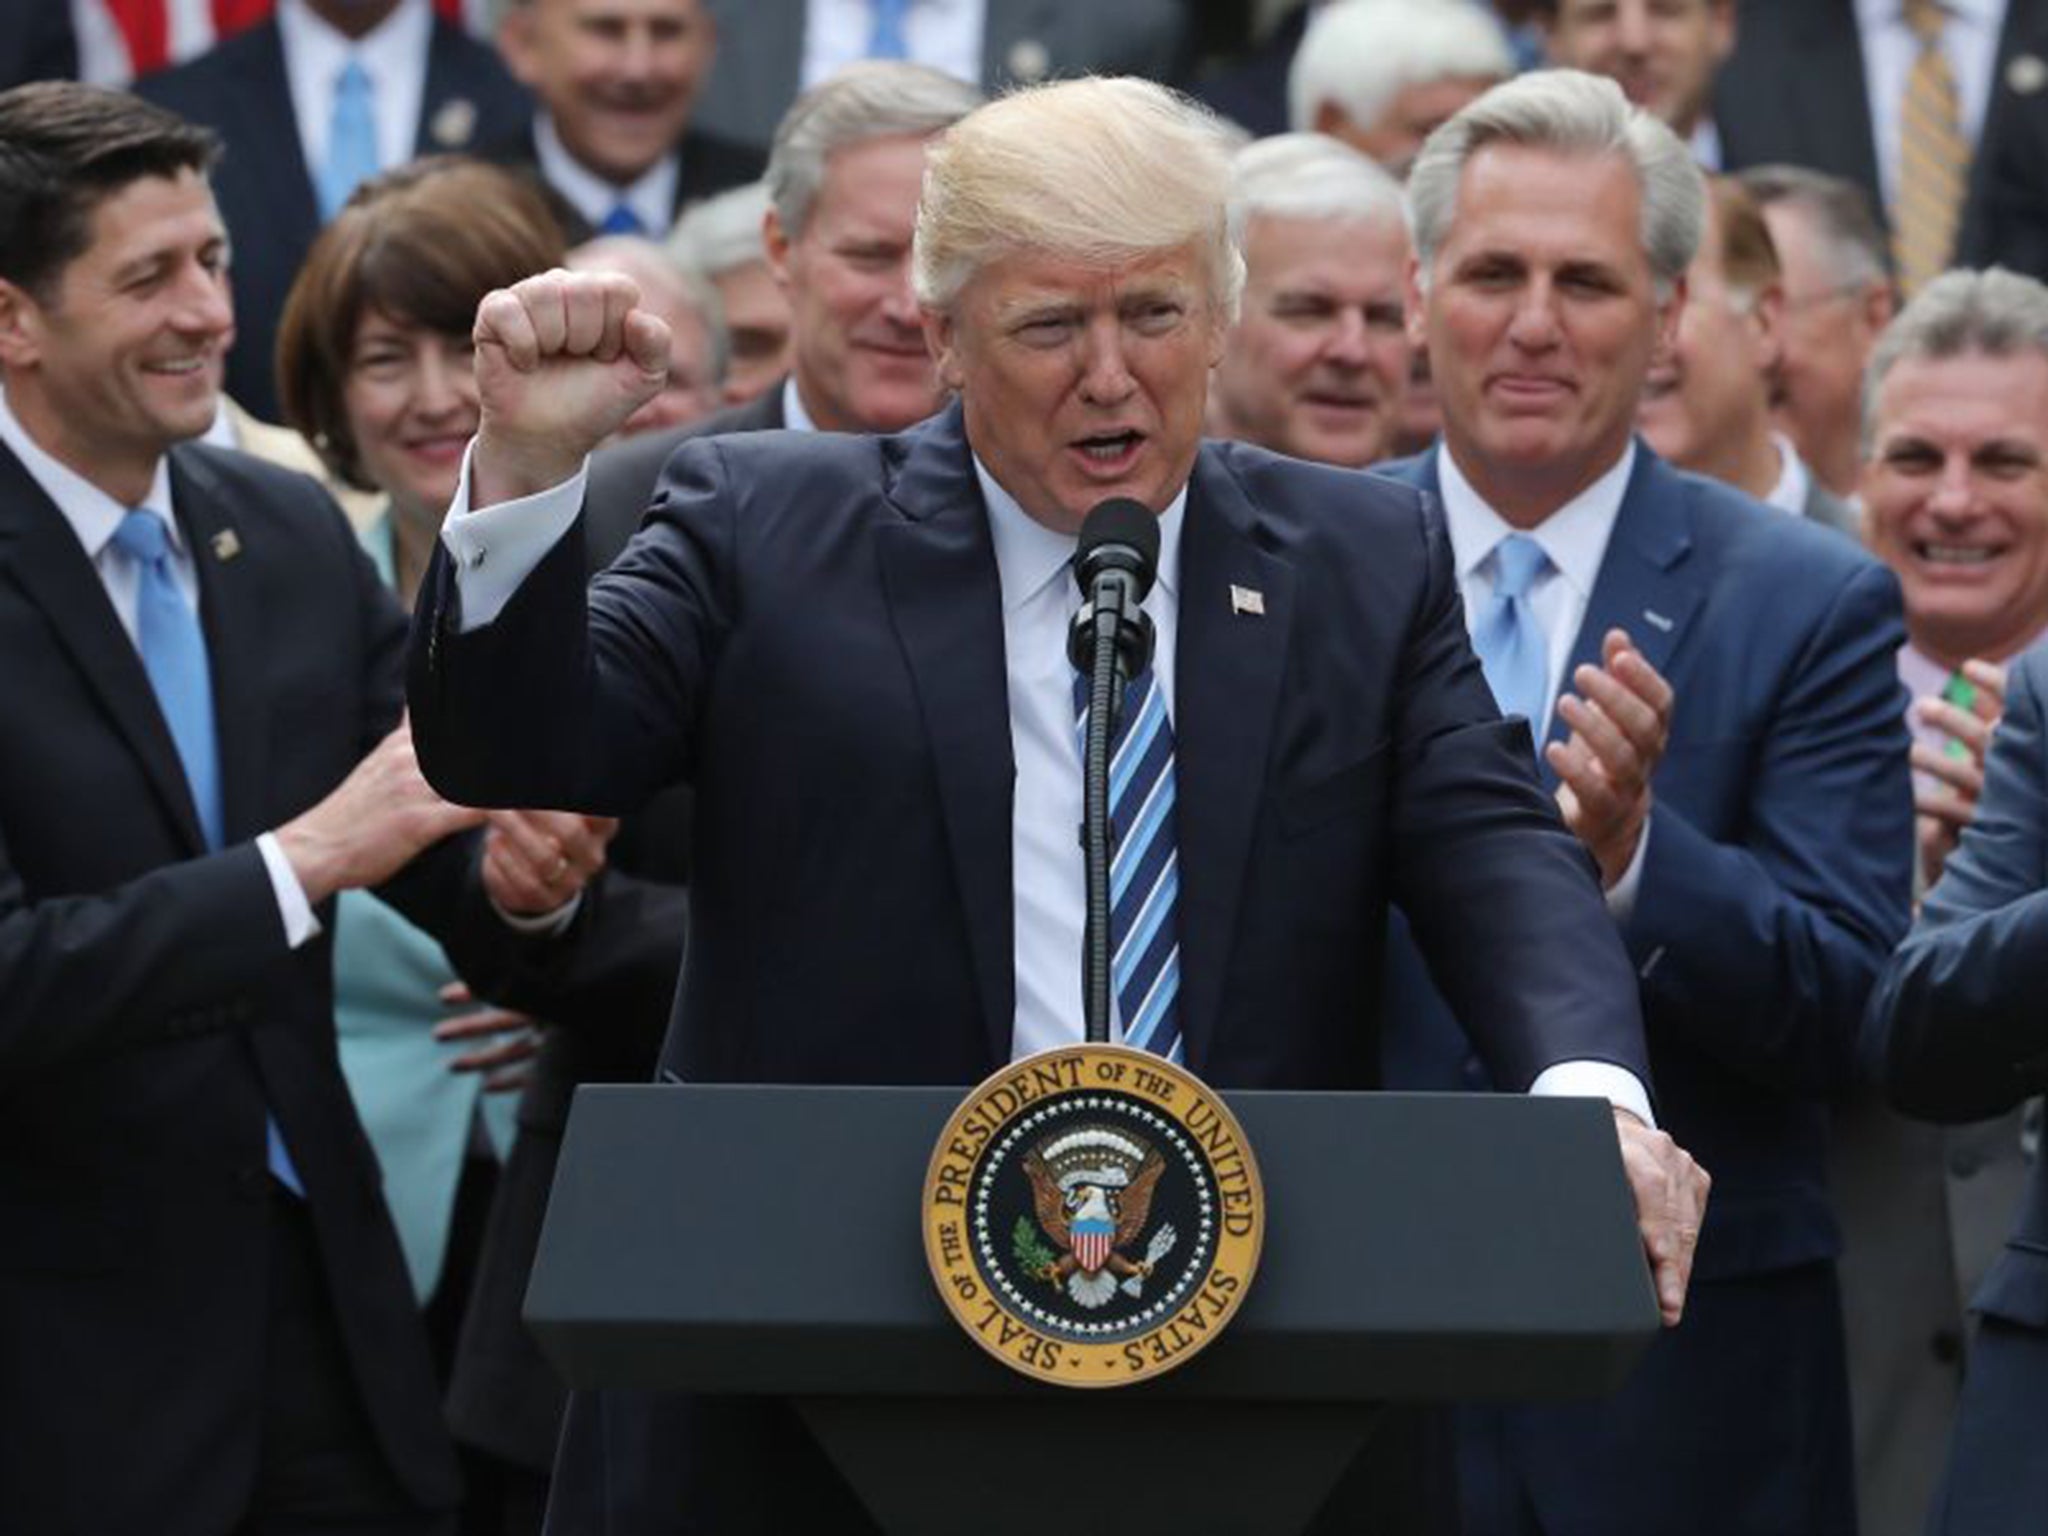 Donald Trump celebrates with Congressional Republicans in the Rose Garden of the White House after the House of Representatives approved the American Healthcare Act